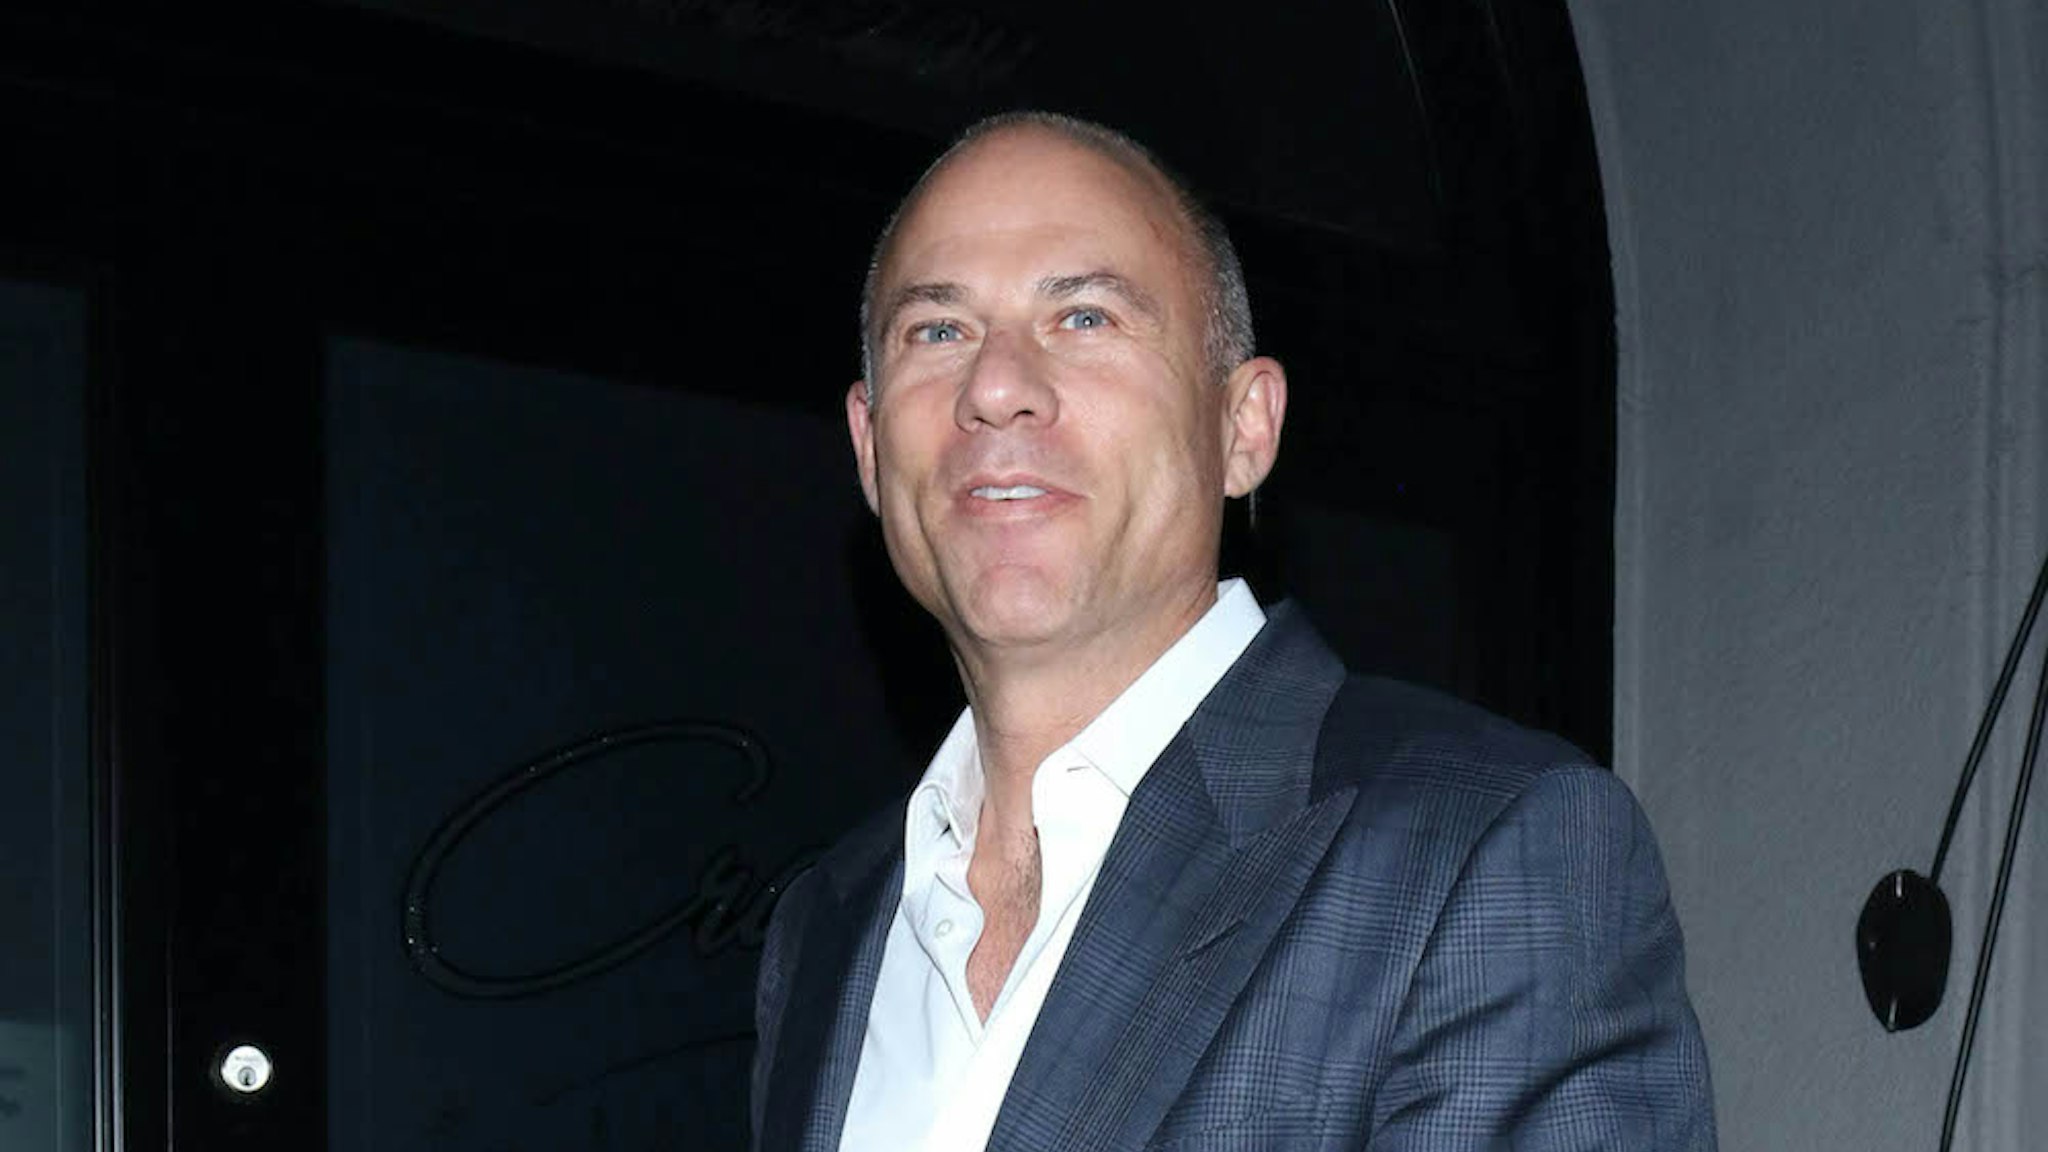 Michael Avenatti is seen on December 12, 2019 in Los Angeles, California. (Photo by OGUT/Star Max/GC Images)